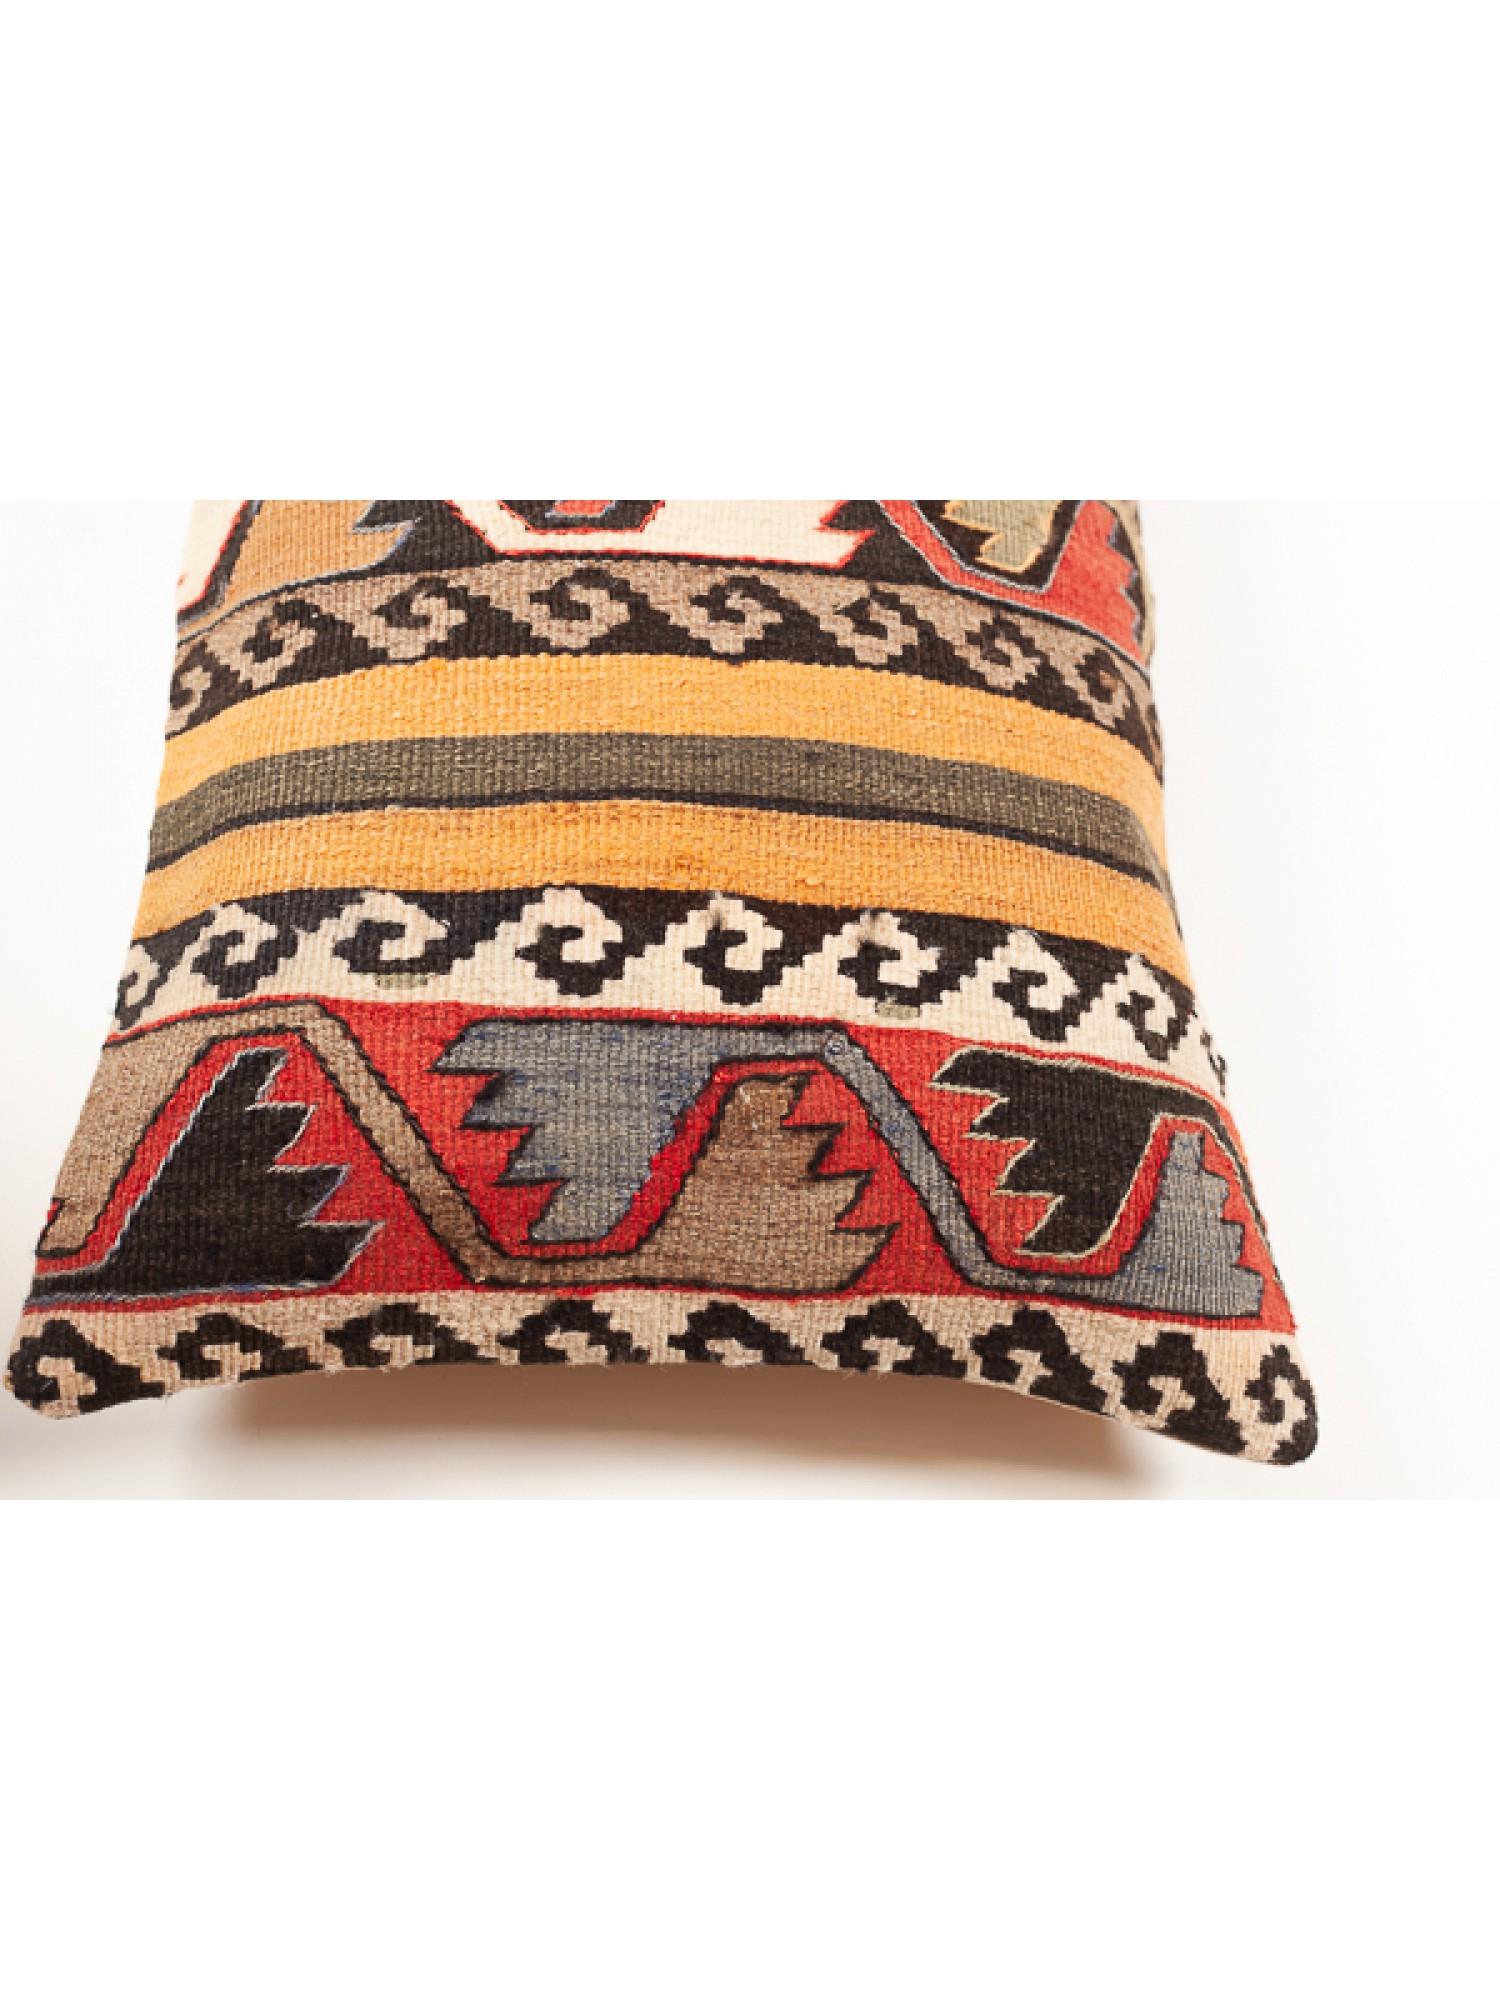 We made a cushion cover using the undamaged part of the precious and high-quality old & antique kilims that cannot be repaired as a whole. Like a painting, a part of the scenery is cut out from a kilim, and even several covers cut out from the same